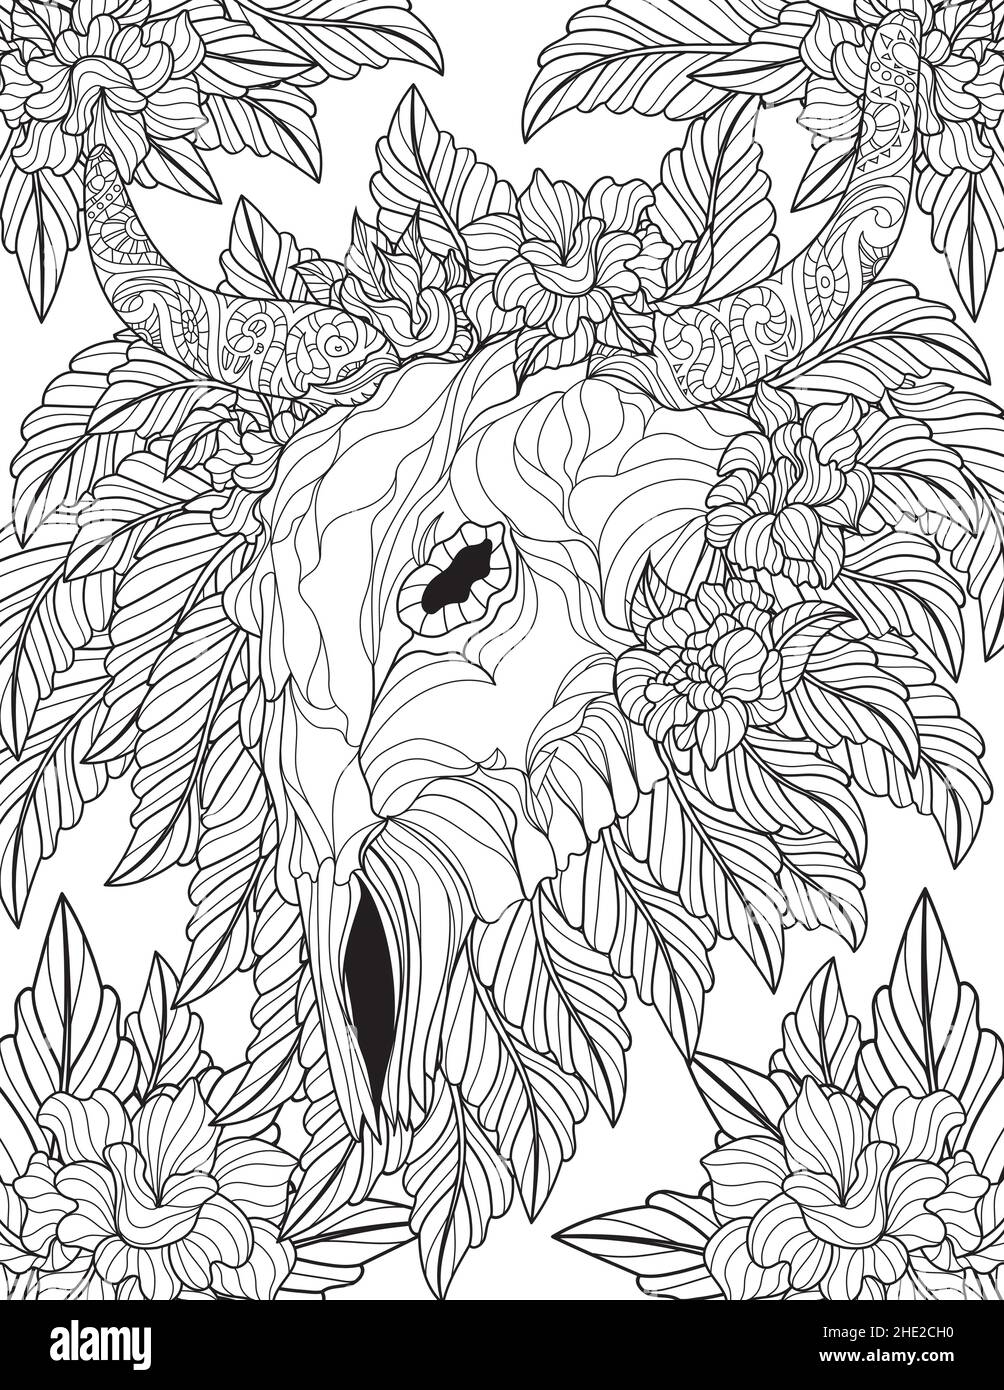 Dead Bull Skull With Long Horns Surrounded With Flowers Line Drawing For Coloring Book Stock Vector